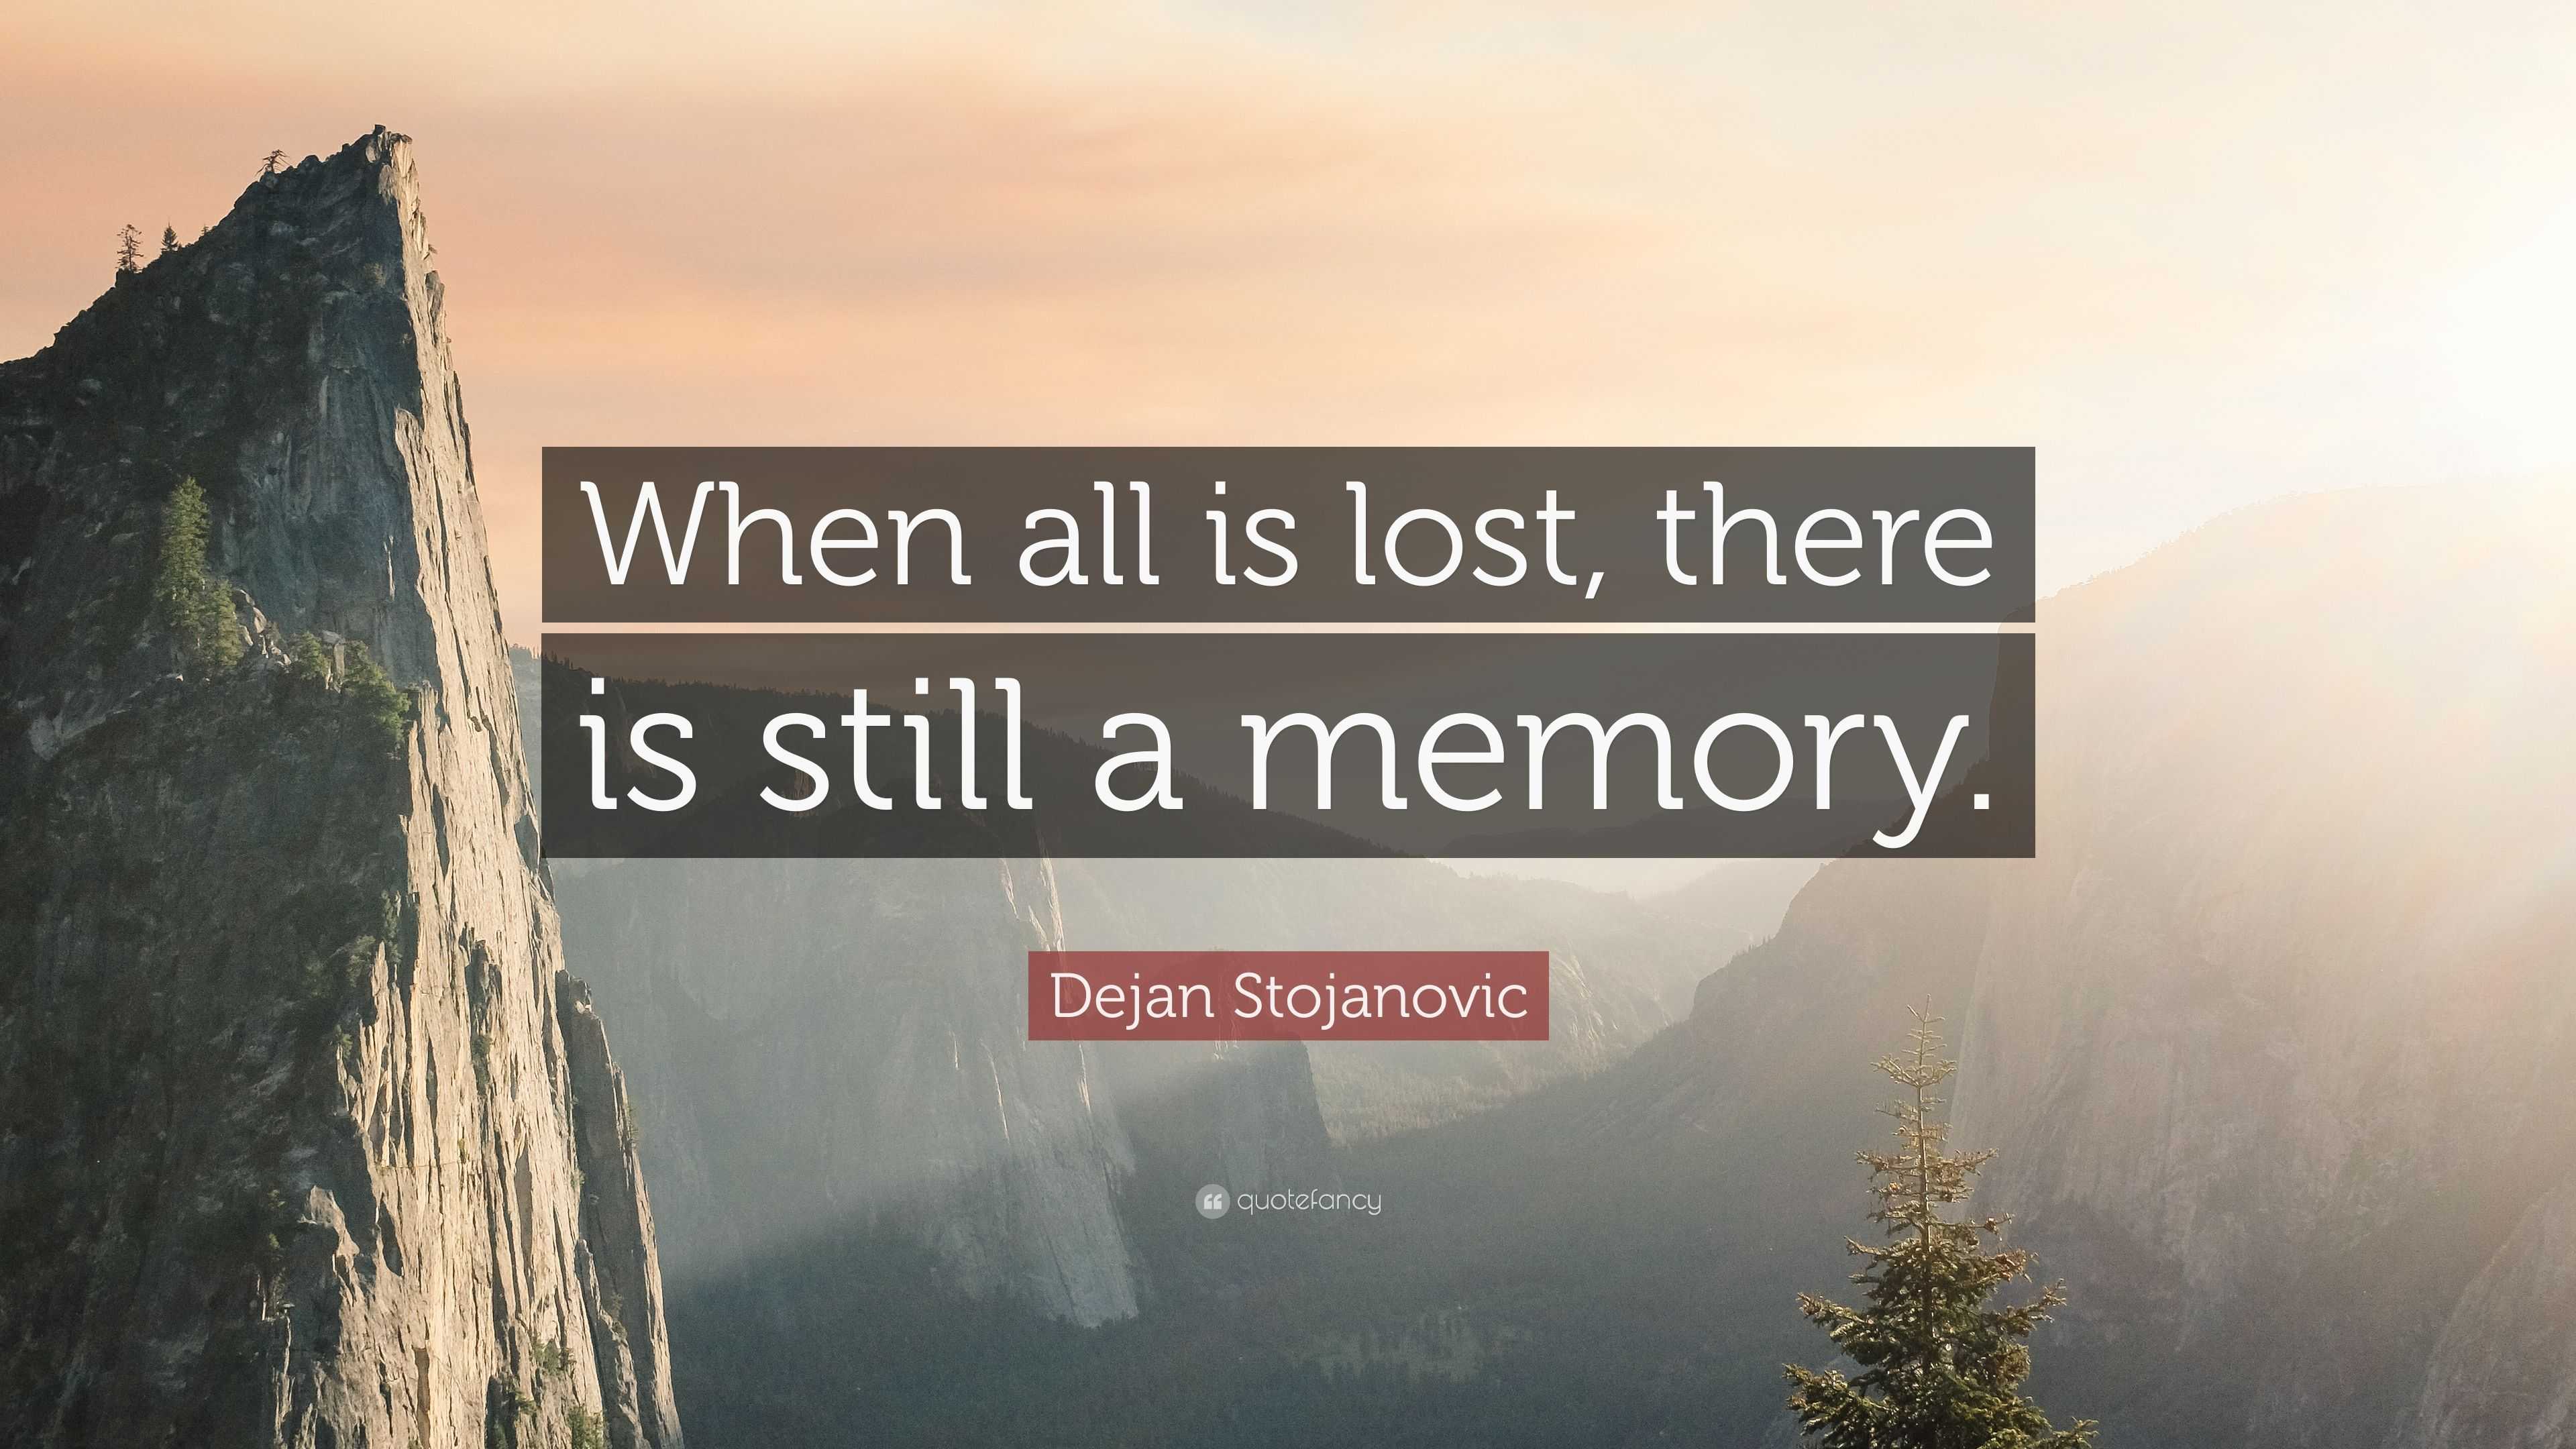 Dejan Stojanovic Quote: “When all is lost, there is still a memory.”